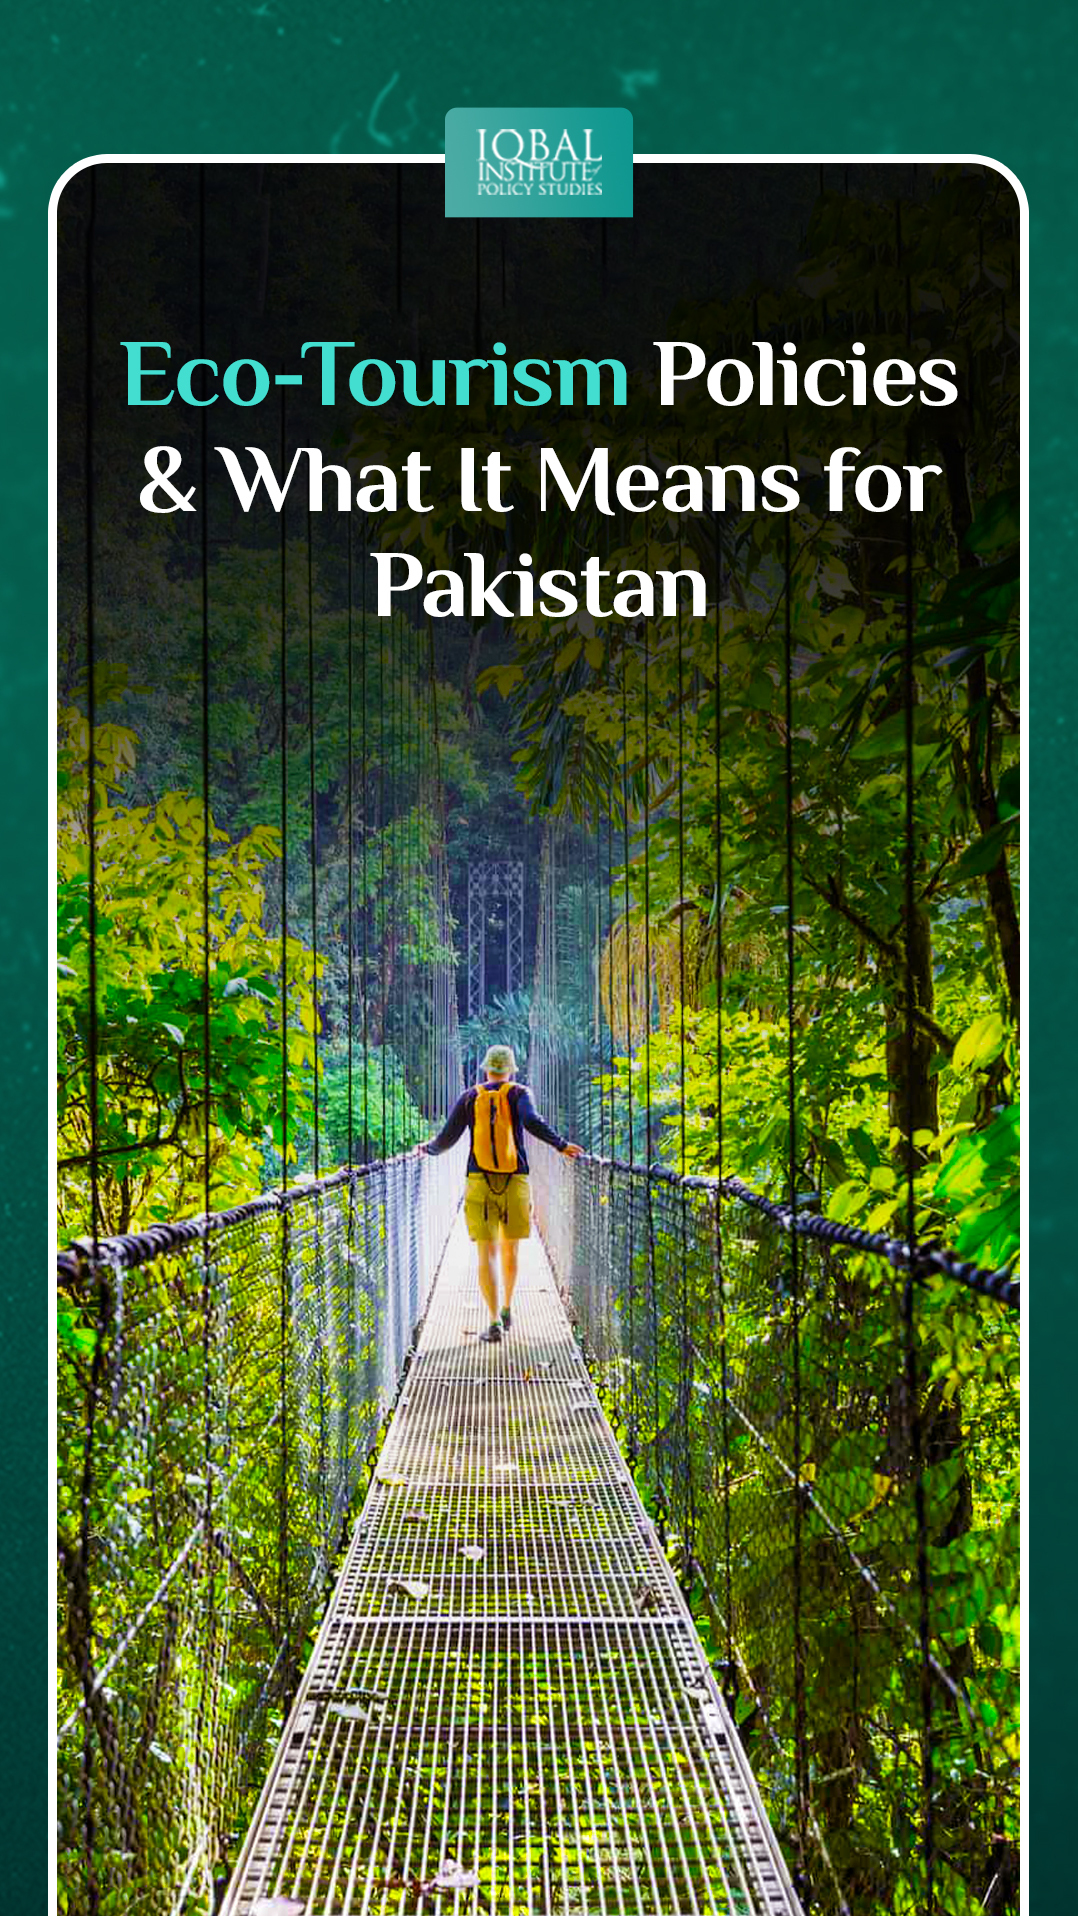 Eco-tourism Policies & What It Means for Pakistan